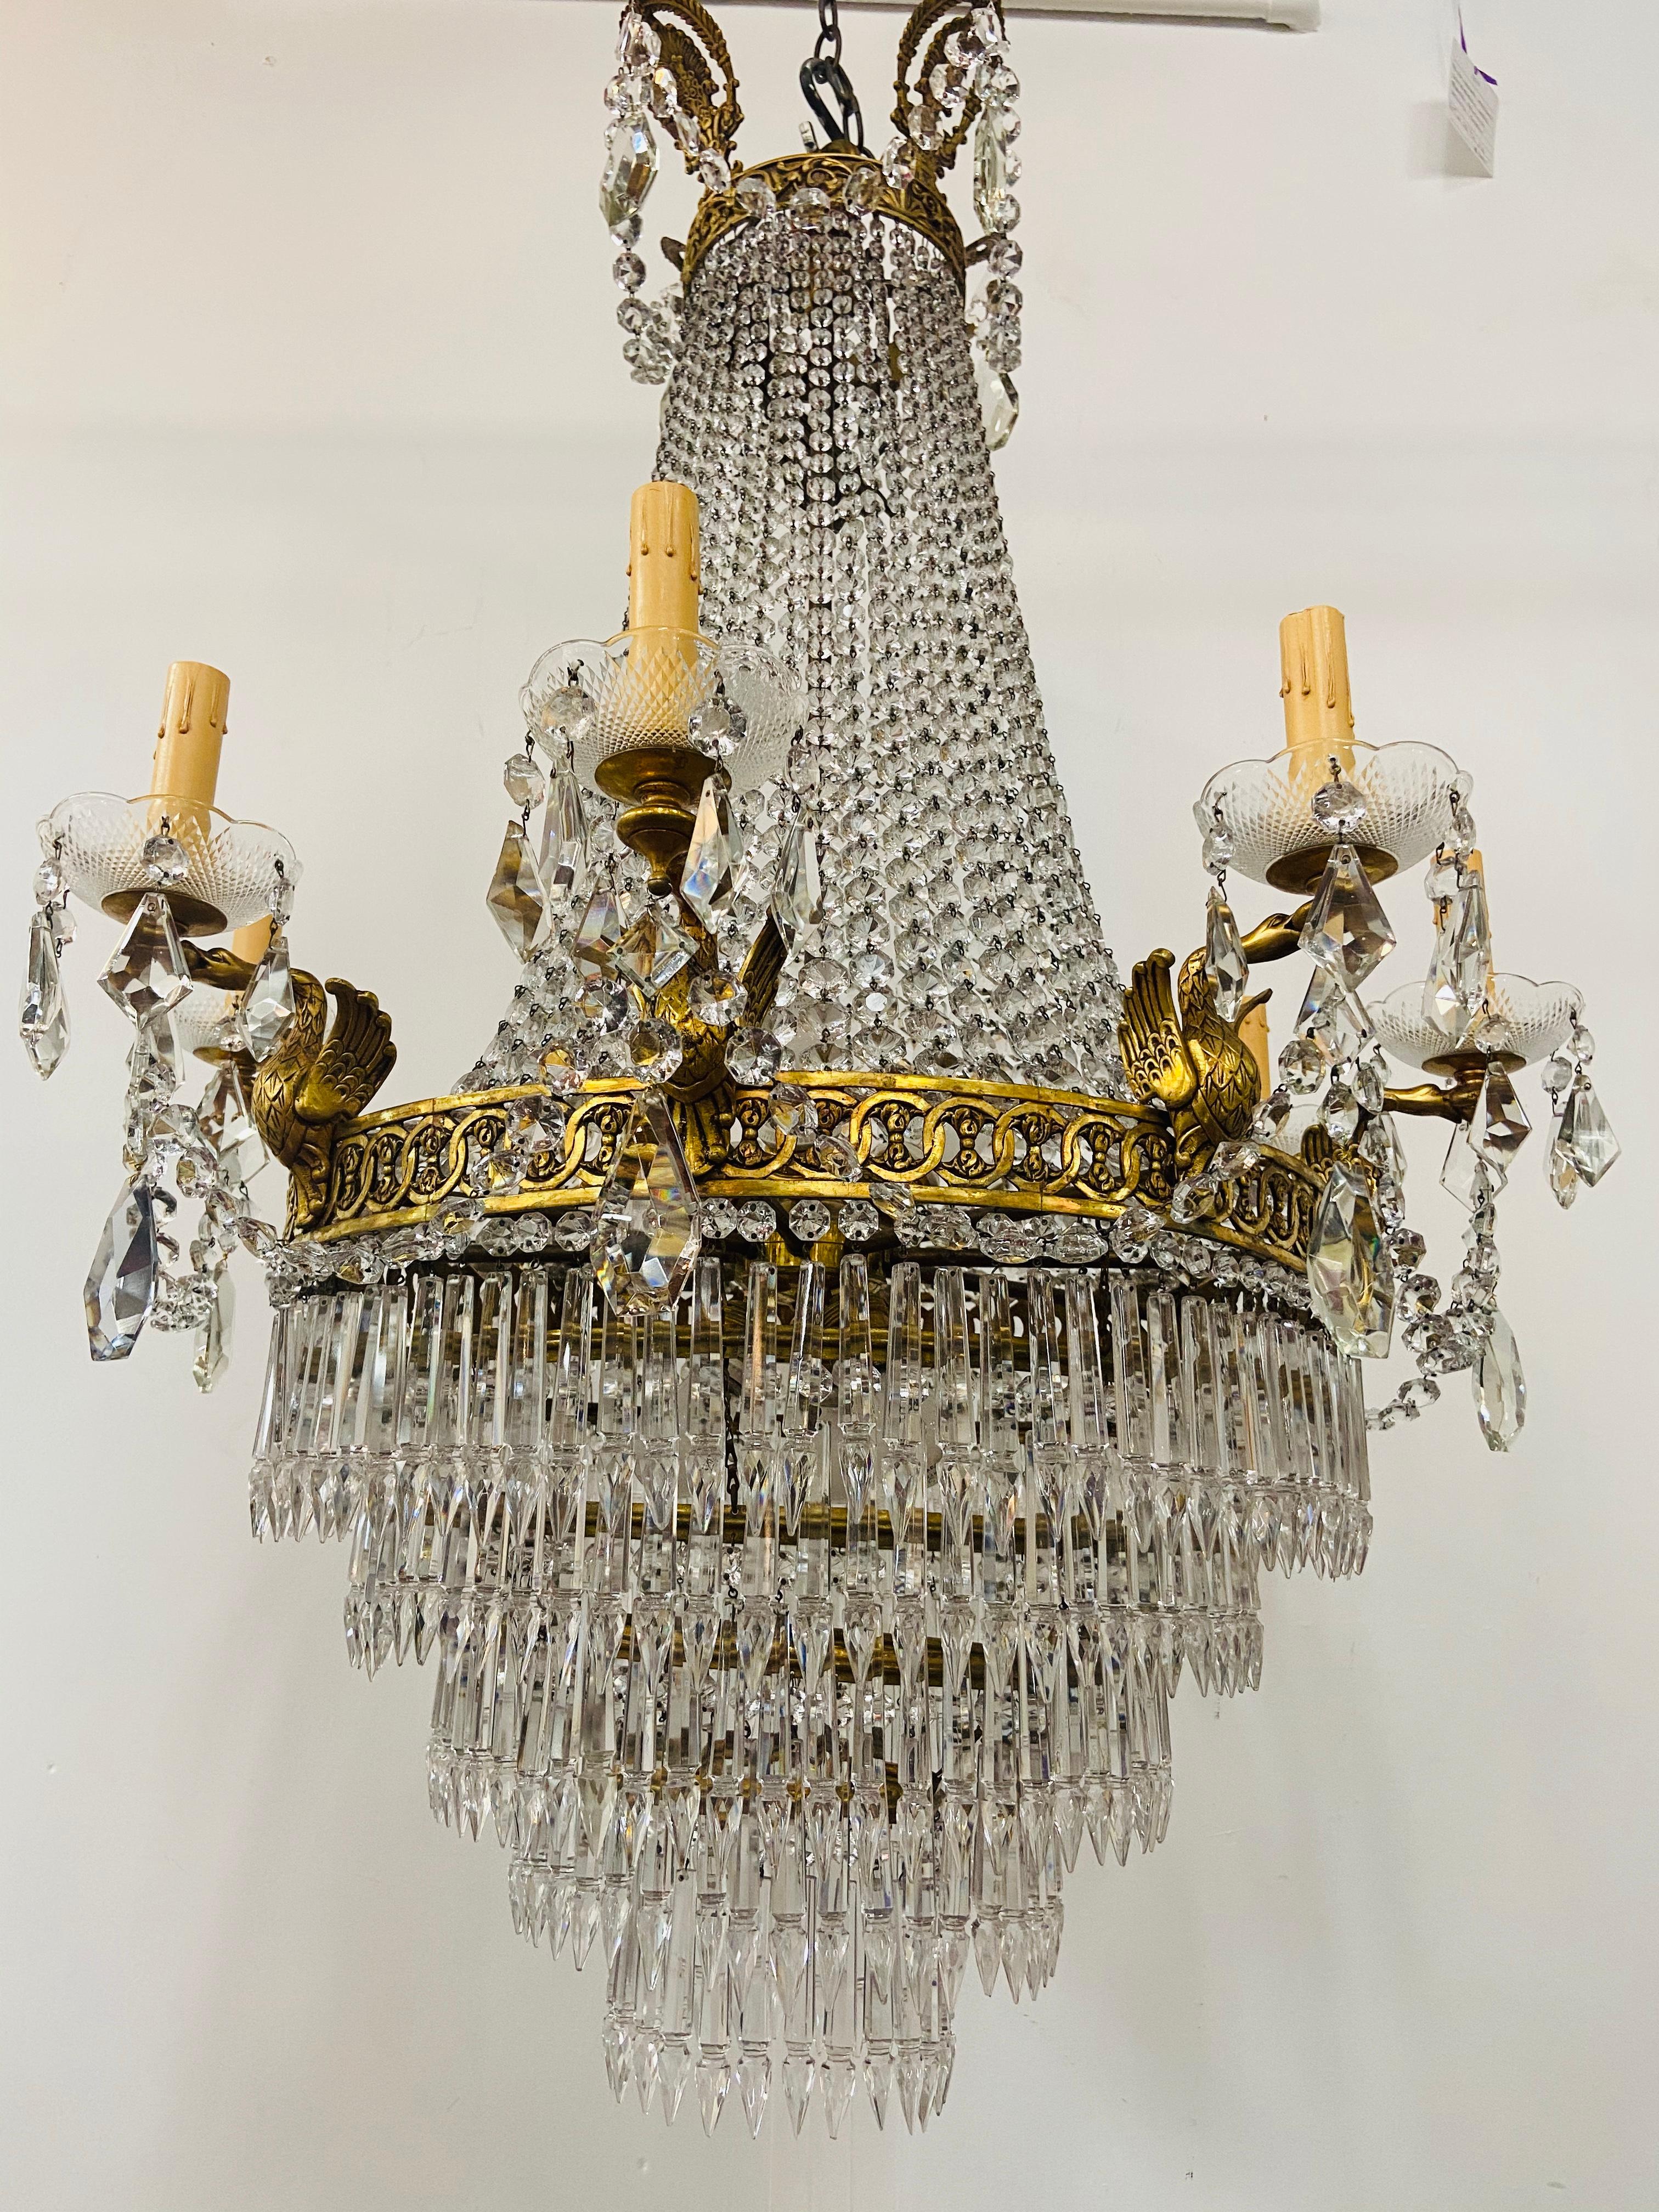 A rare 19th Century bonze and crystal French Louis XVI Empire style chandelier with 8 arms supported by a bronze ring and beaded crystal strands in a dome form top converging on a bottom finial and extending to top. The chandelier features 8 sturdy